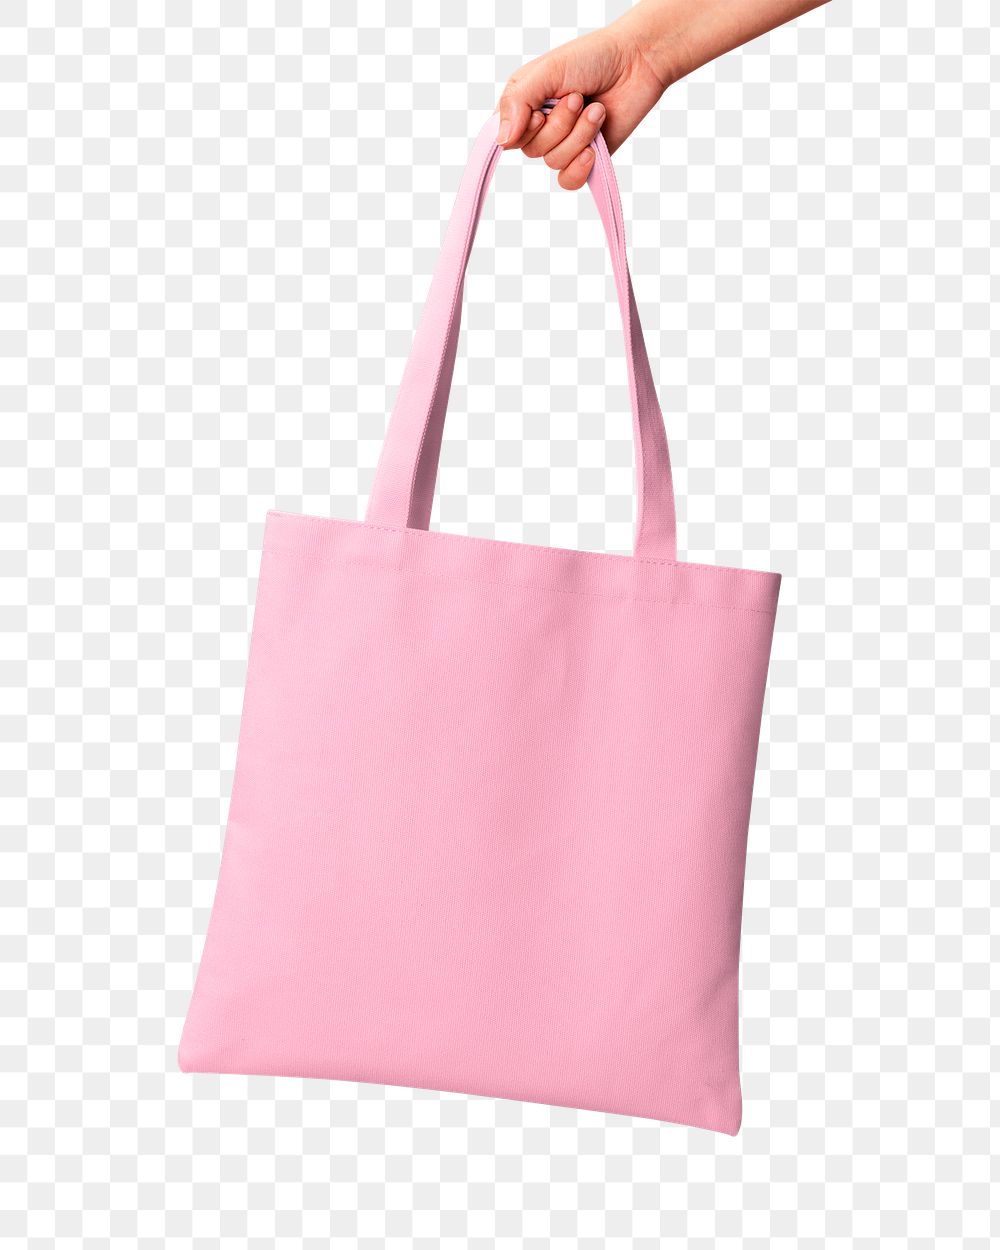 Tote bag png sticker, eco-friendly accessory on transparent background